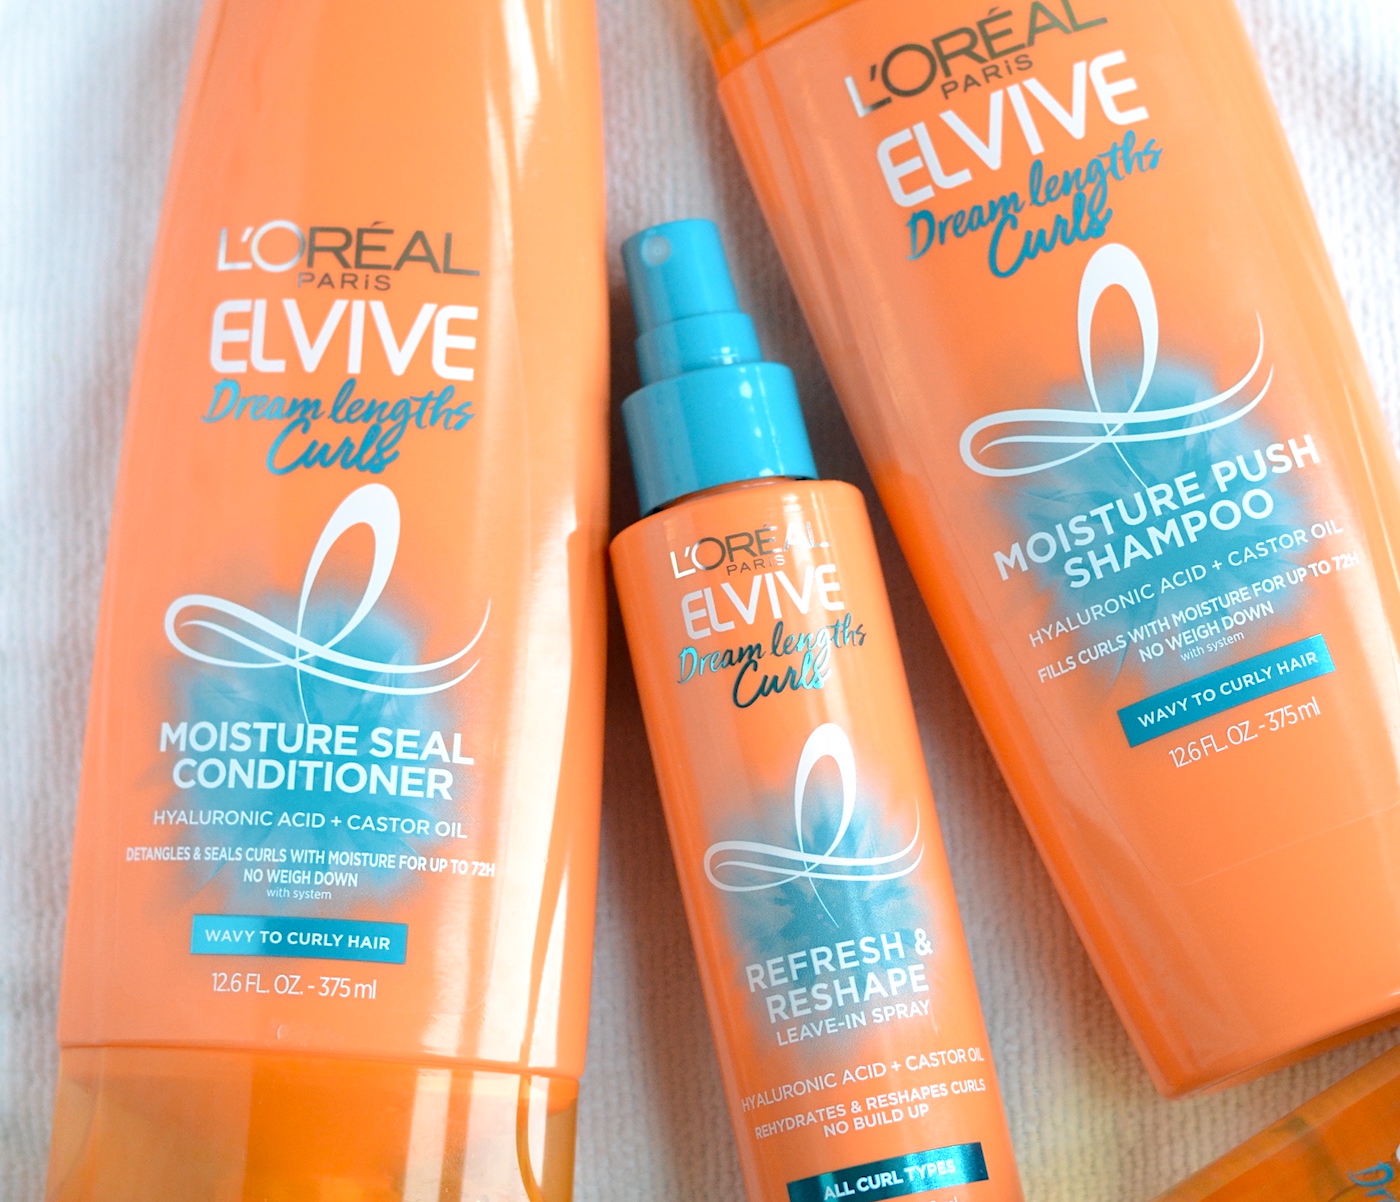 L'Oreal Elvive Dream Lengths Curls Haircare Collection